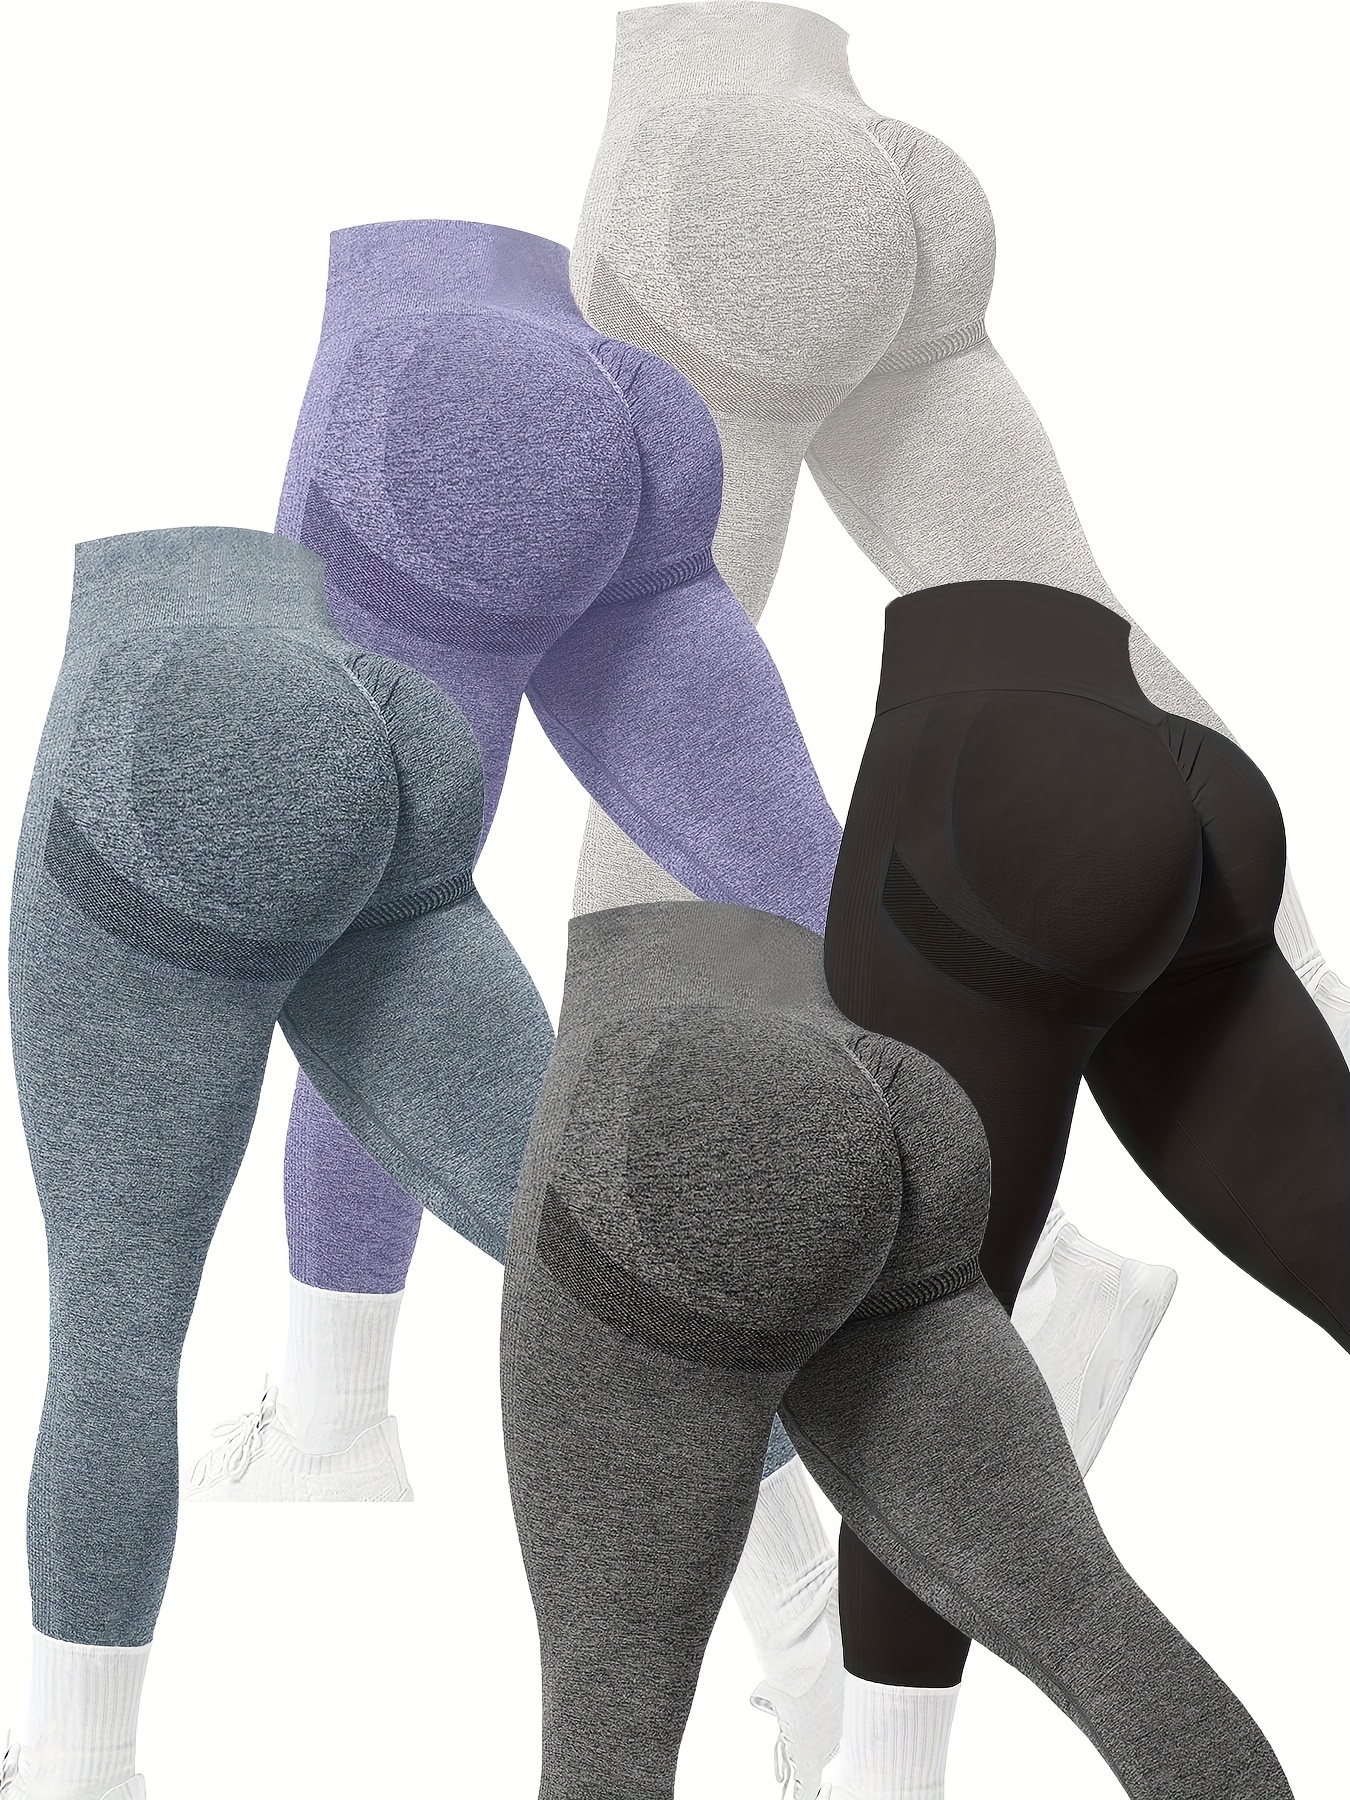 Butt Lifting Leggings (Scrunchars Tights) are the True Game-Changers…